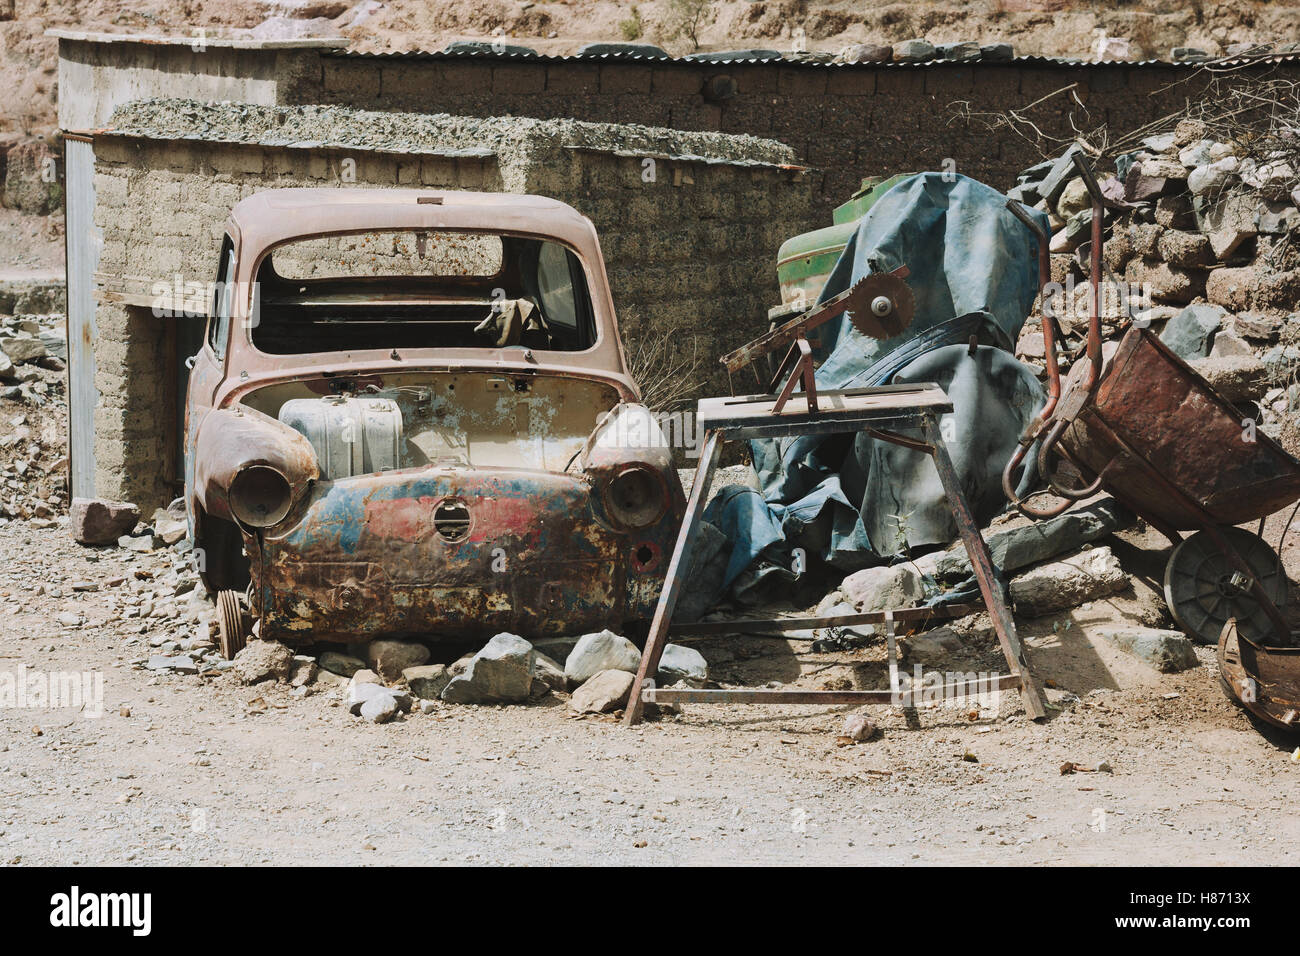 Broken and abandoned car amongst rubble and utensils in Iruya. Stock Photo